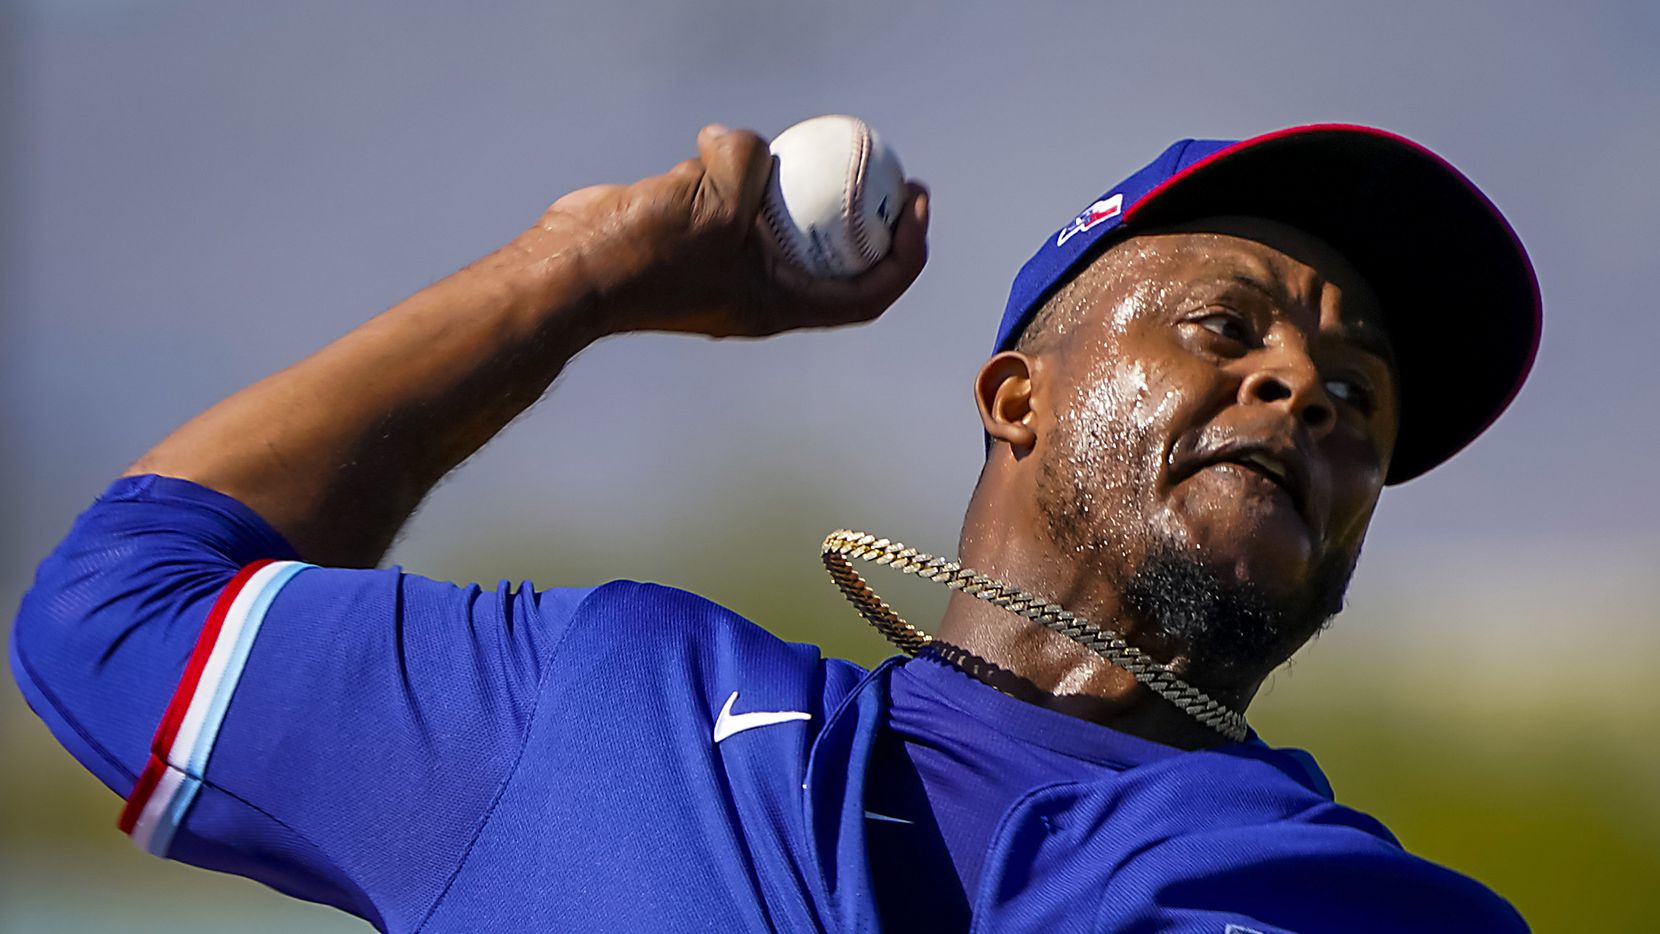 Texas Rangers pitcher Edinson Volquez throws live batting practice during a spring training workout at the team's training facility on Wednesday, Feb. 19, 2020, in Surprise, Ariz.